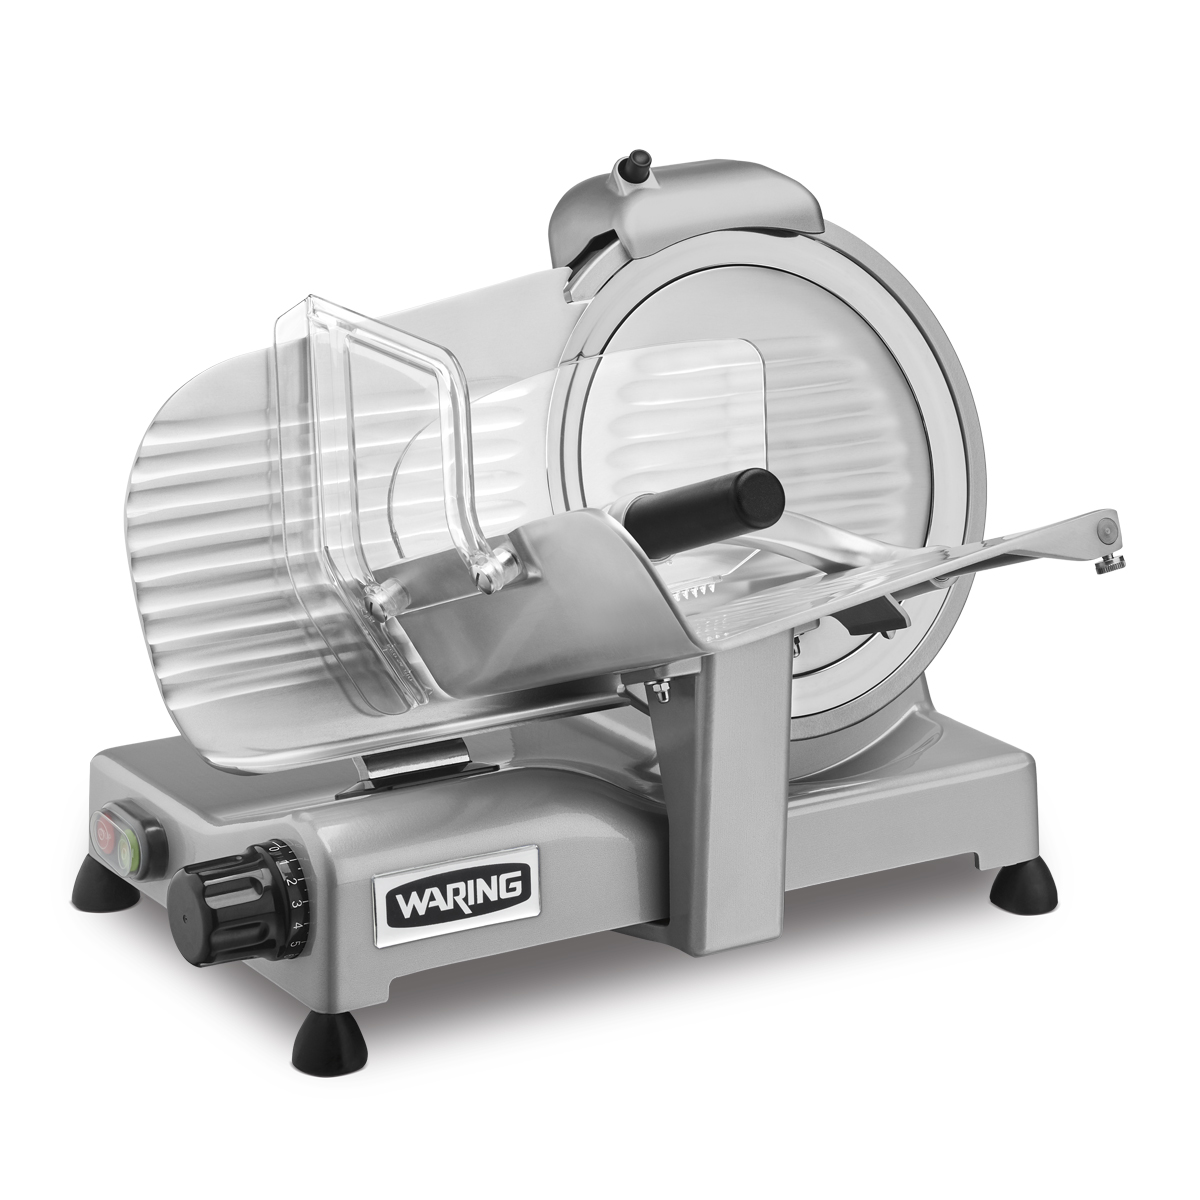 https://www.waringcommercialproducts.com/files/products/wcs250sv-professional-food-slicer-main-image-1200x1200.jpg